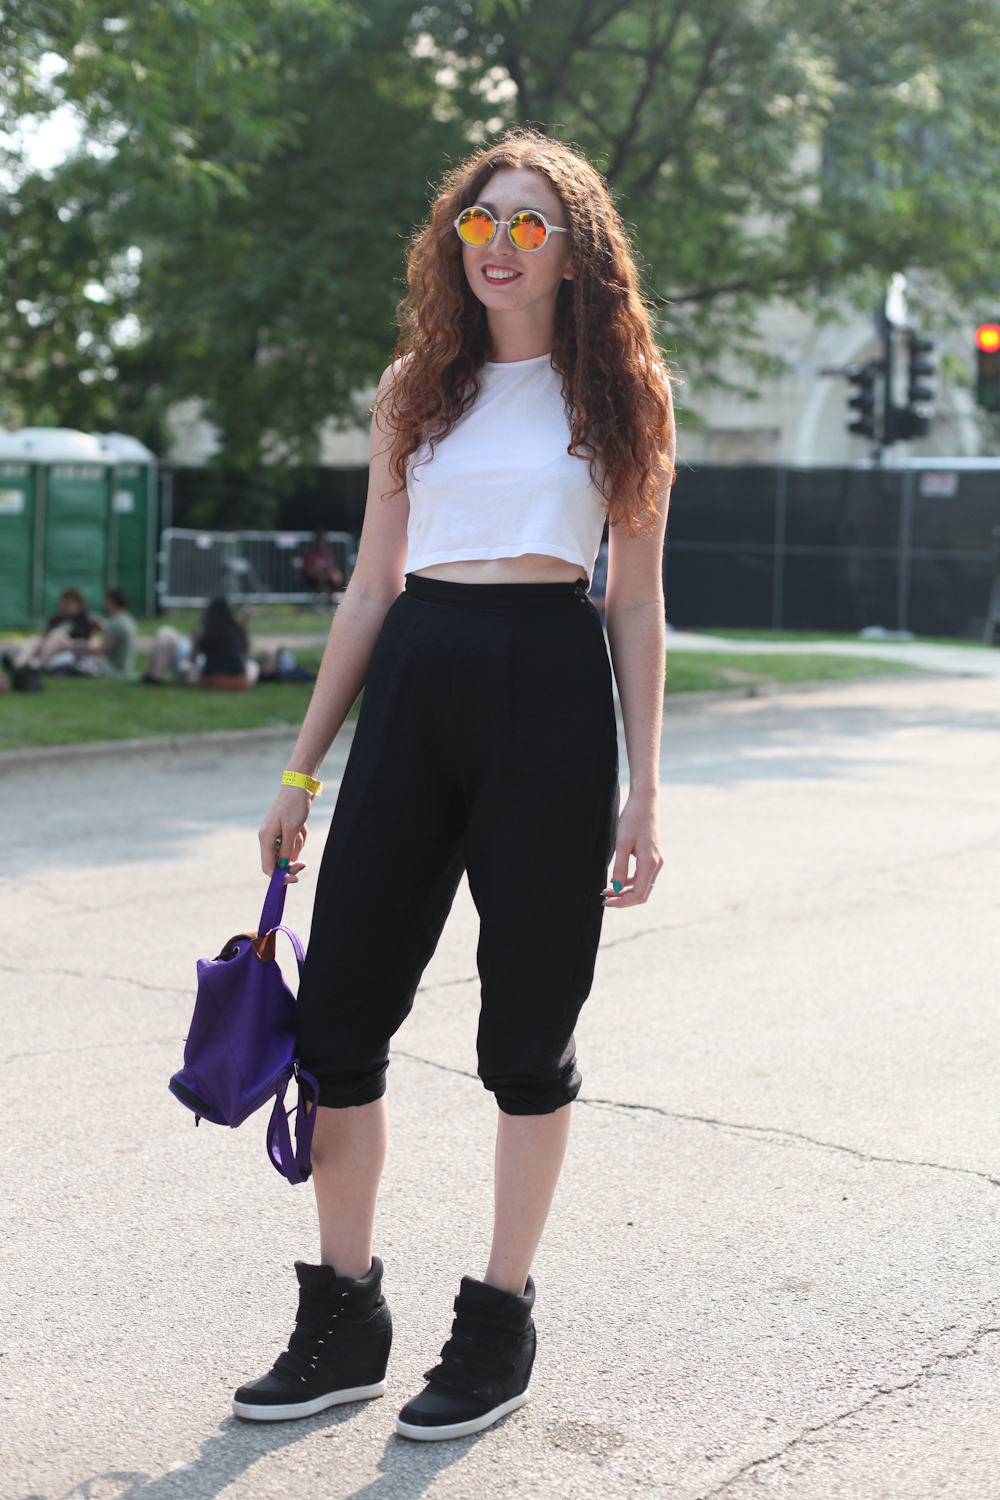 Will  Amy Creyer's Chicago Street Style Fashion Blog